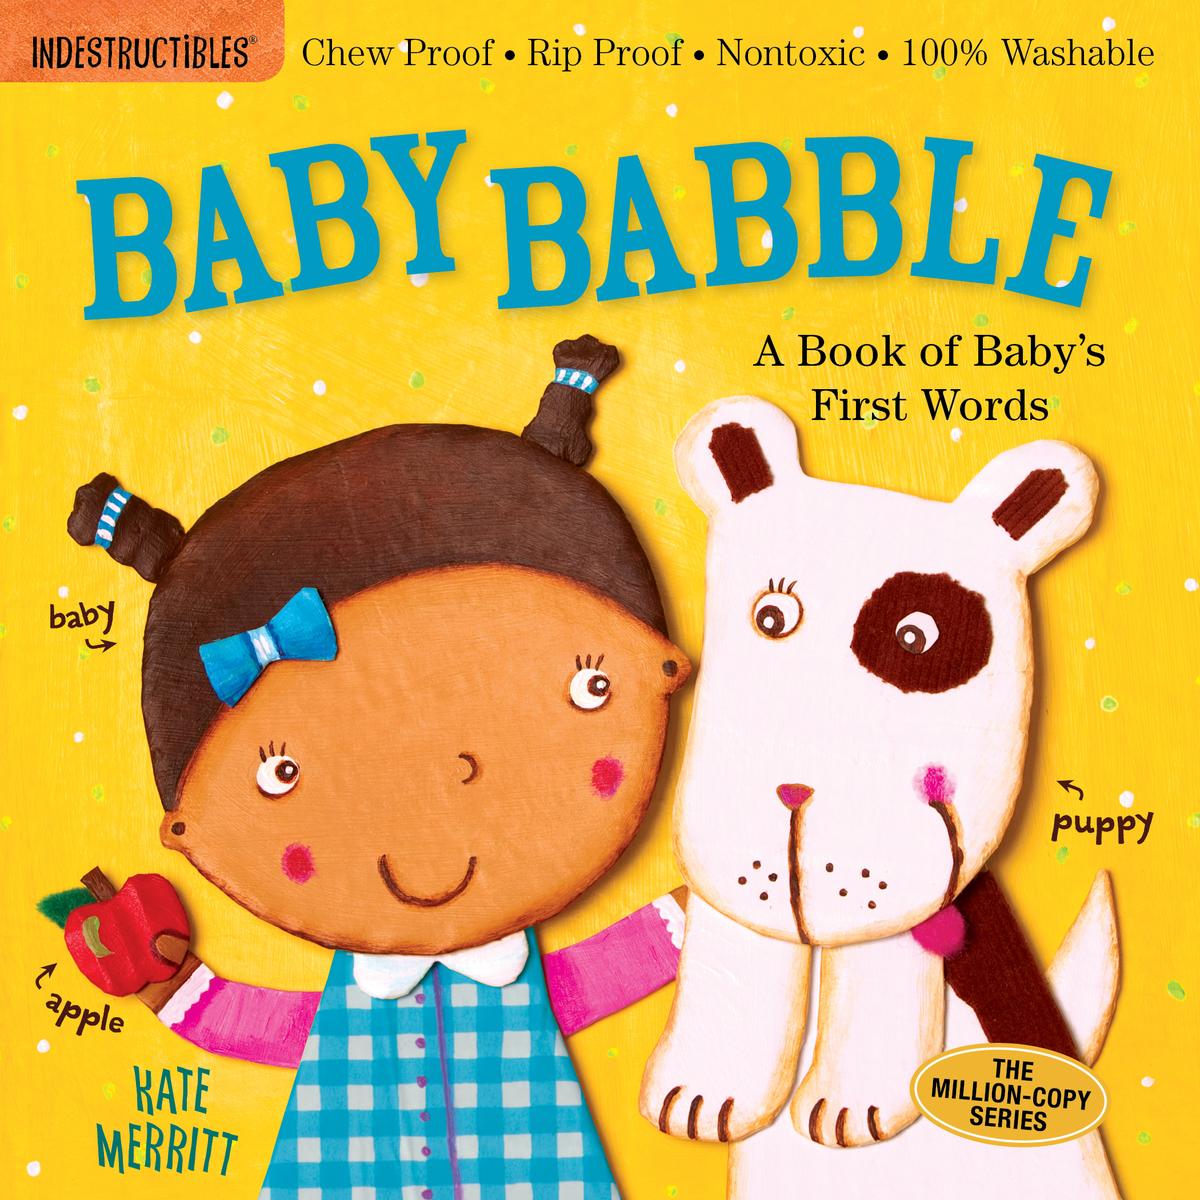 Indestructibles - Baby Babble: A Book of Baby's First Words: Chew Proof · Rip Proof · Nontoxic · 100% Washable (Book for Babies, Newborn Books, Safe to Chew)